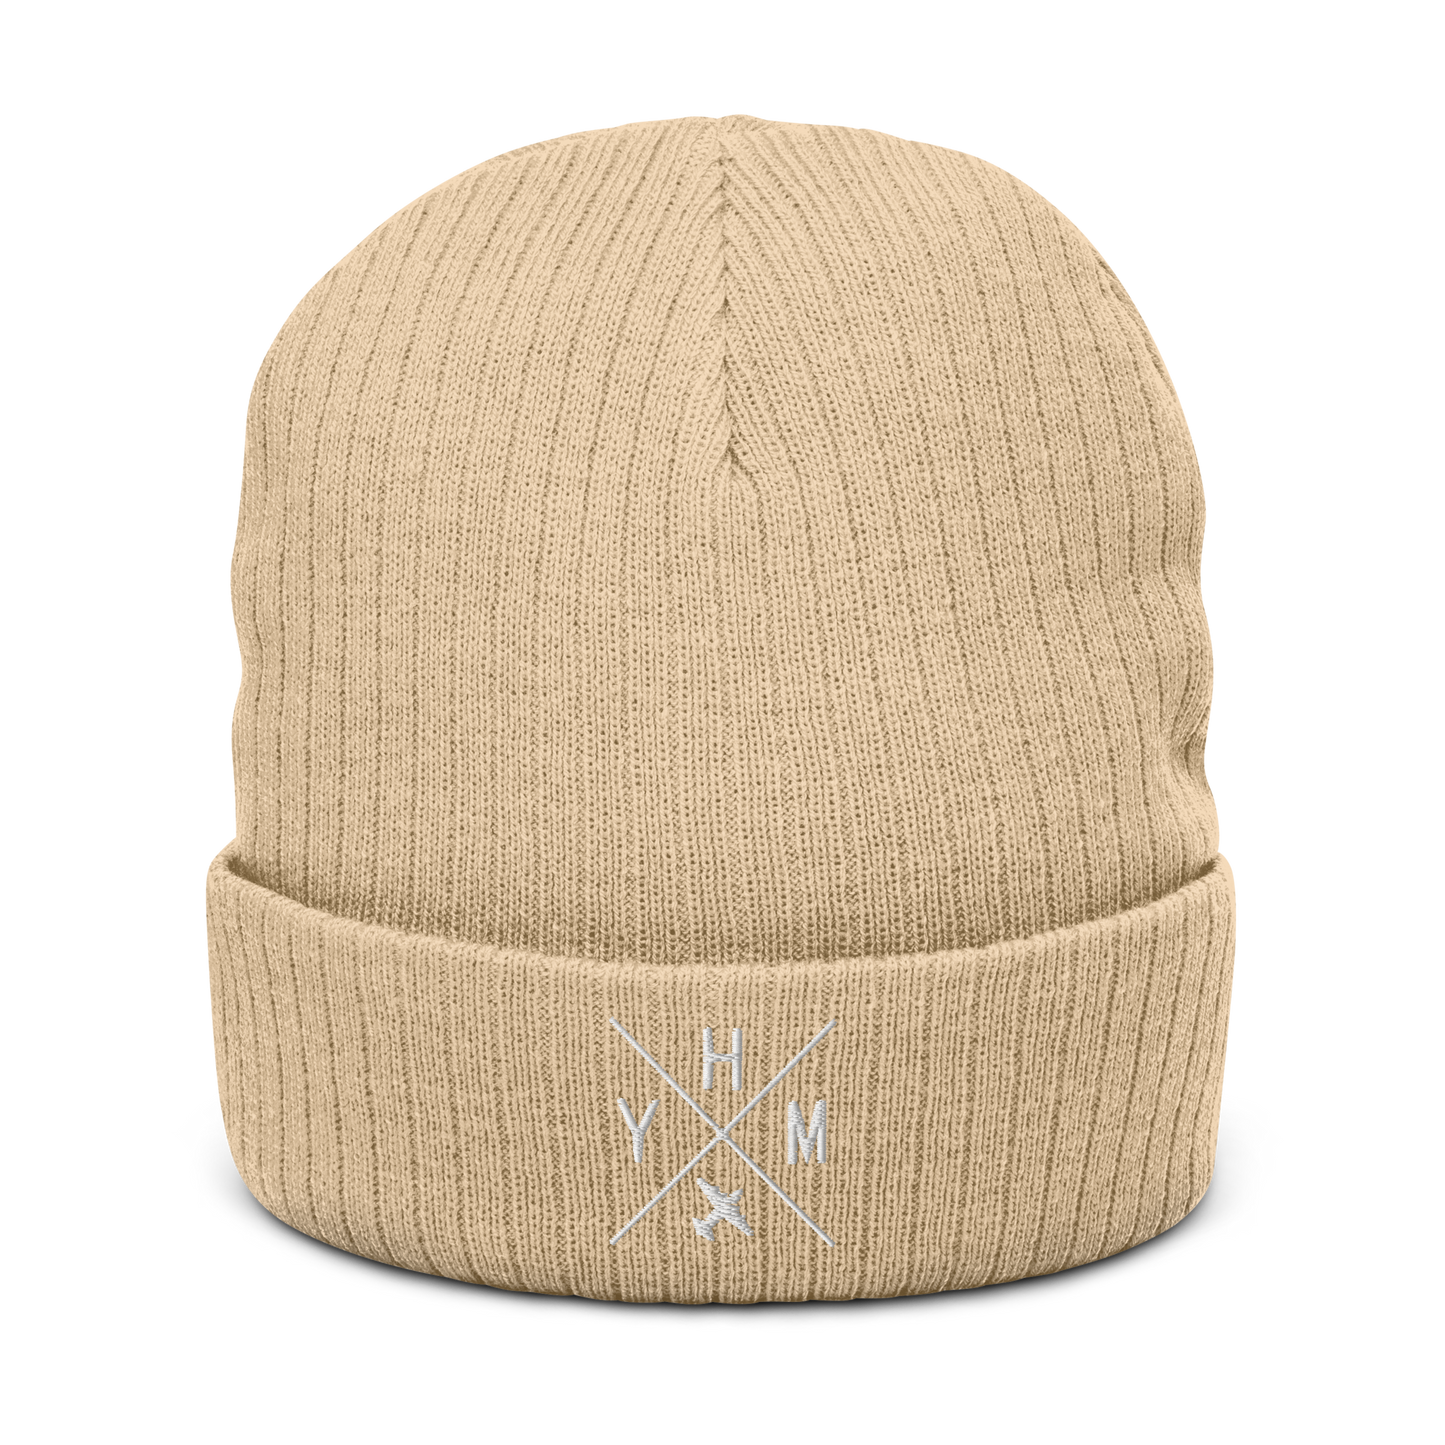 Crossed-X Recycled Ribbed Knit Beanie • White Embroidery